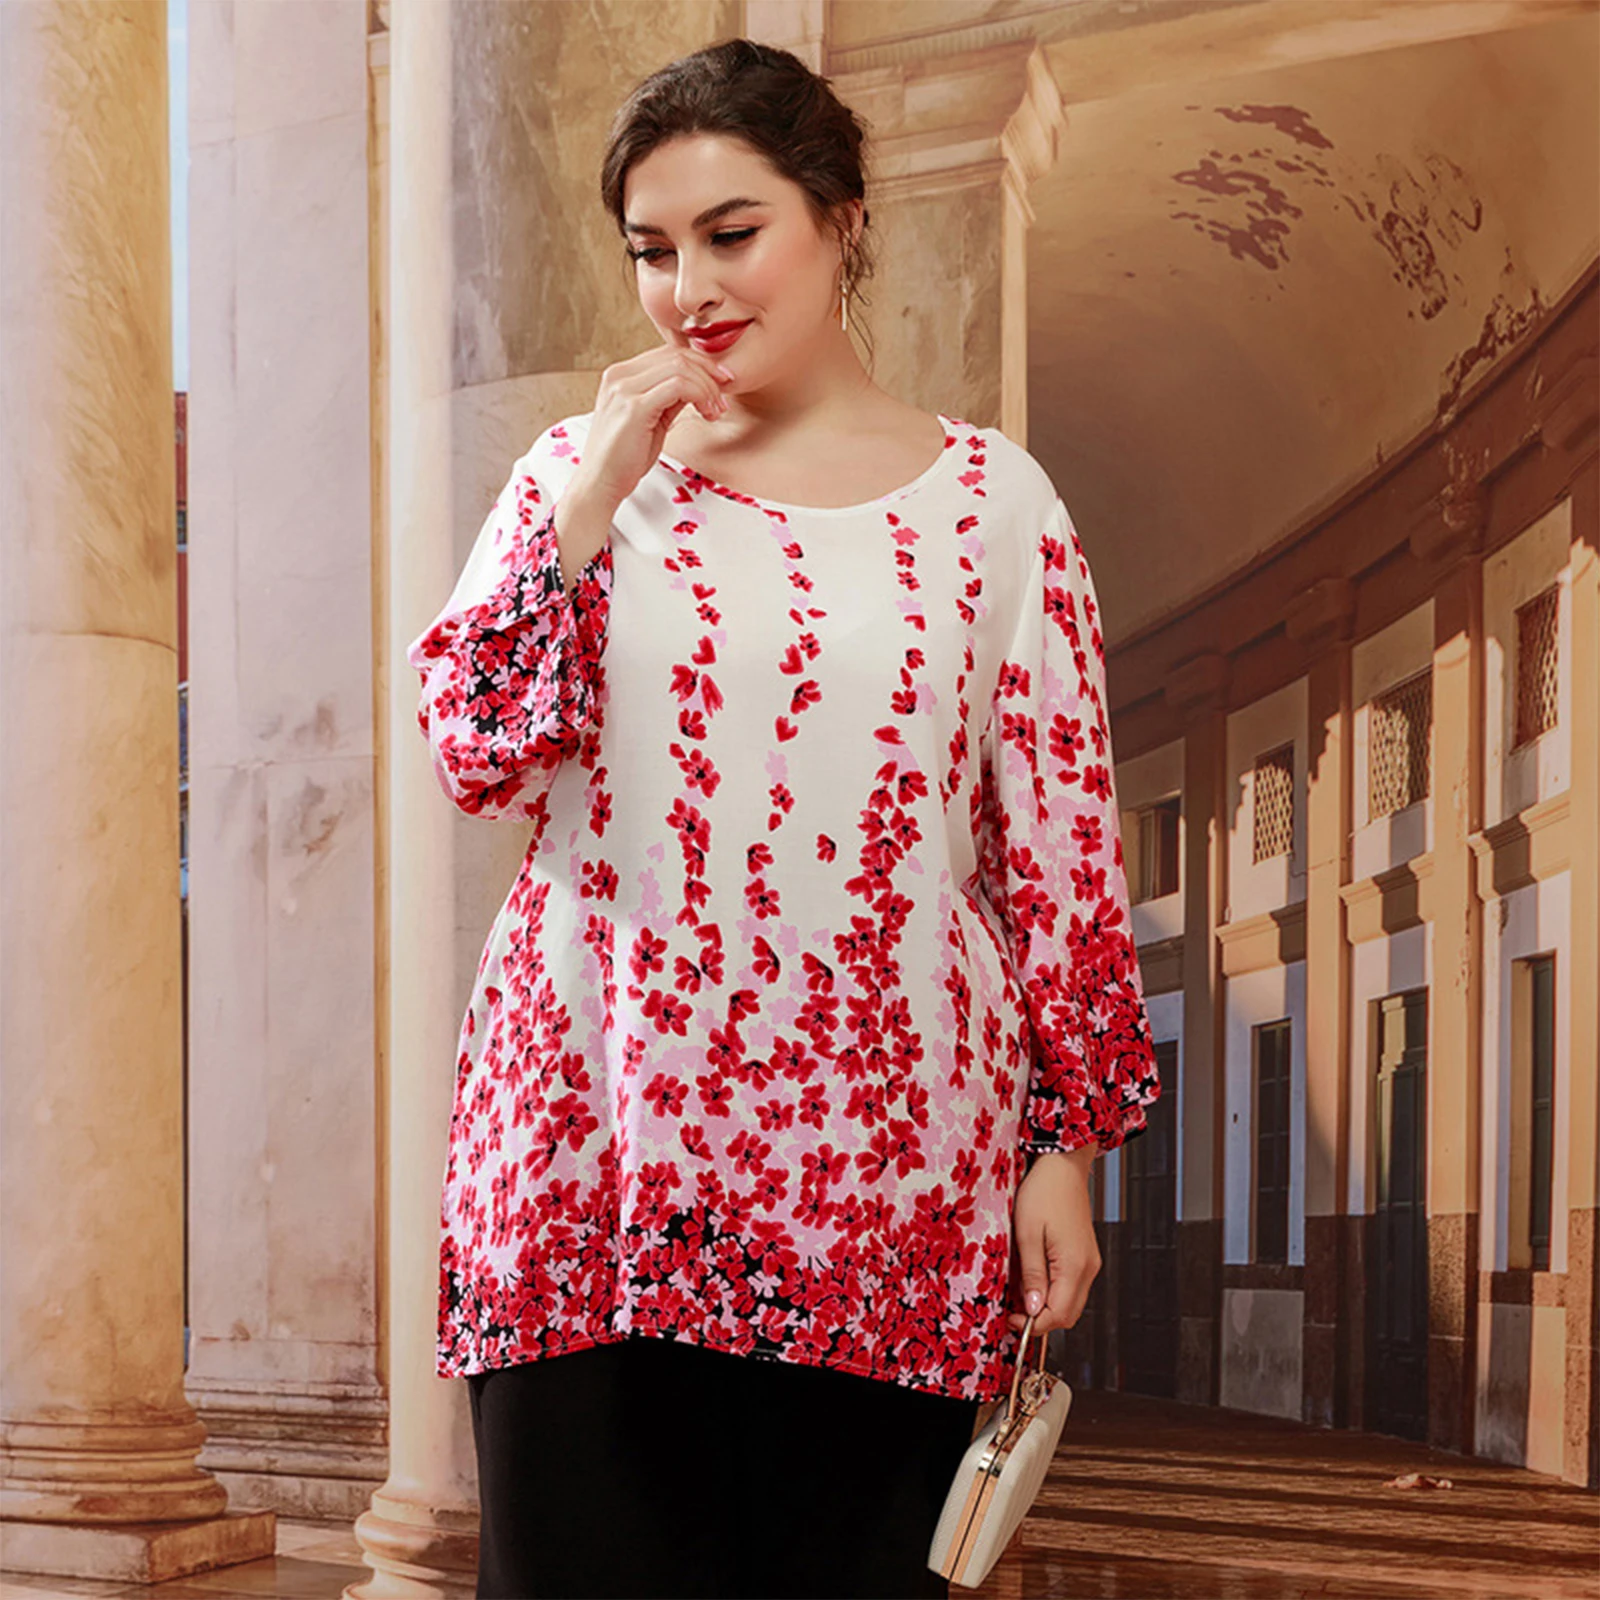 

Women Plus Size 3/4 Sleeve Shirts Ethnic Vintage Floral Print Tunic Blouse Flared Hem Middle East Casual Loose Top